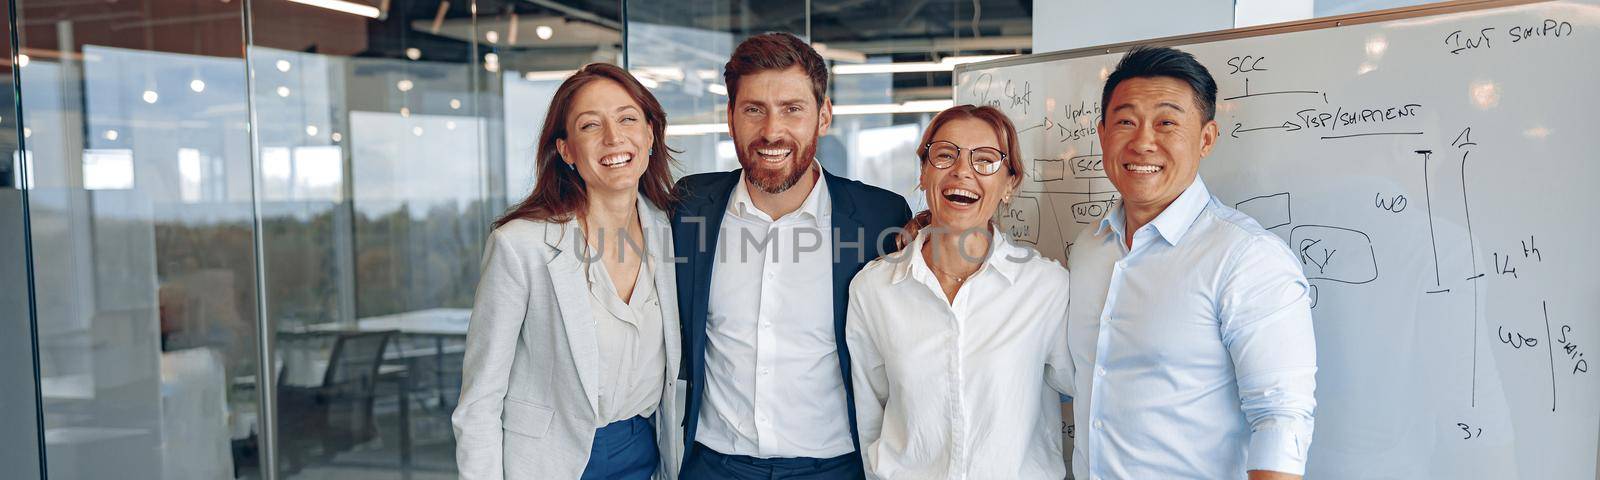 Happy diverse professional business team stand in office near board looking at camera, smiling by Yaroslav_astakhov